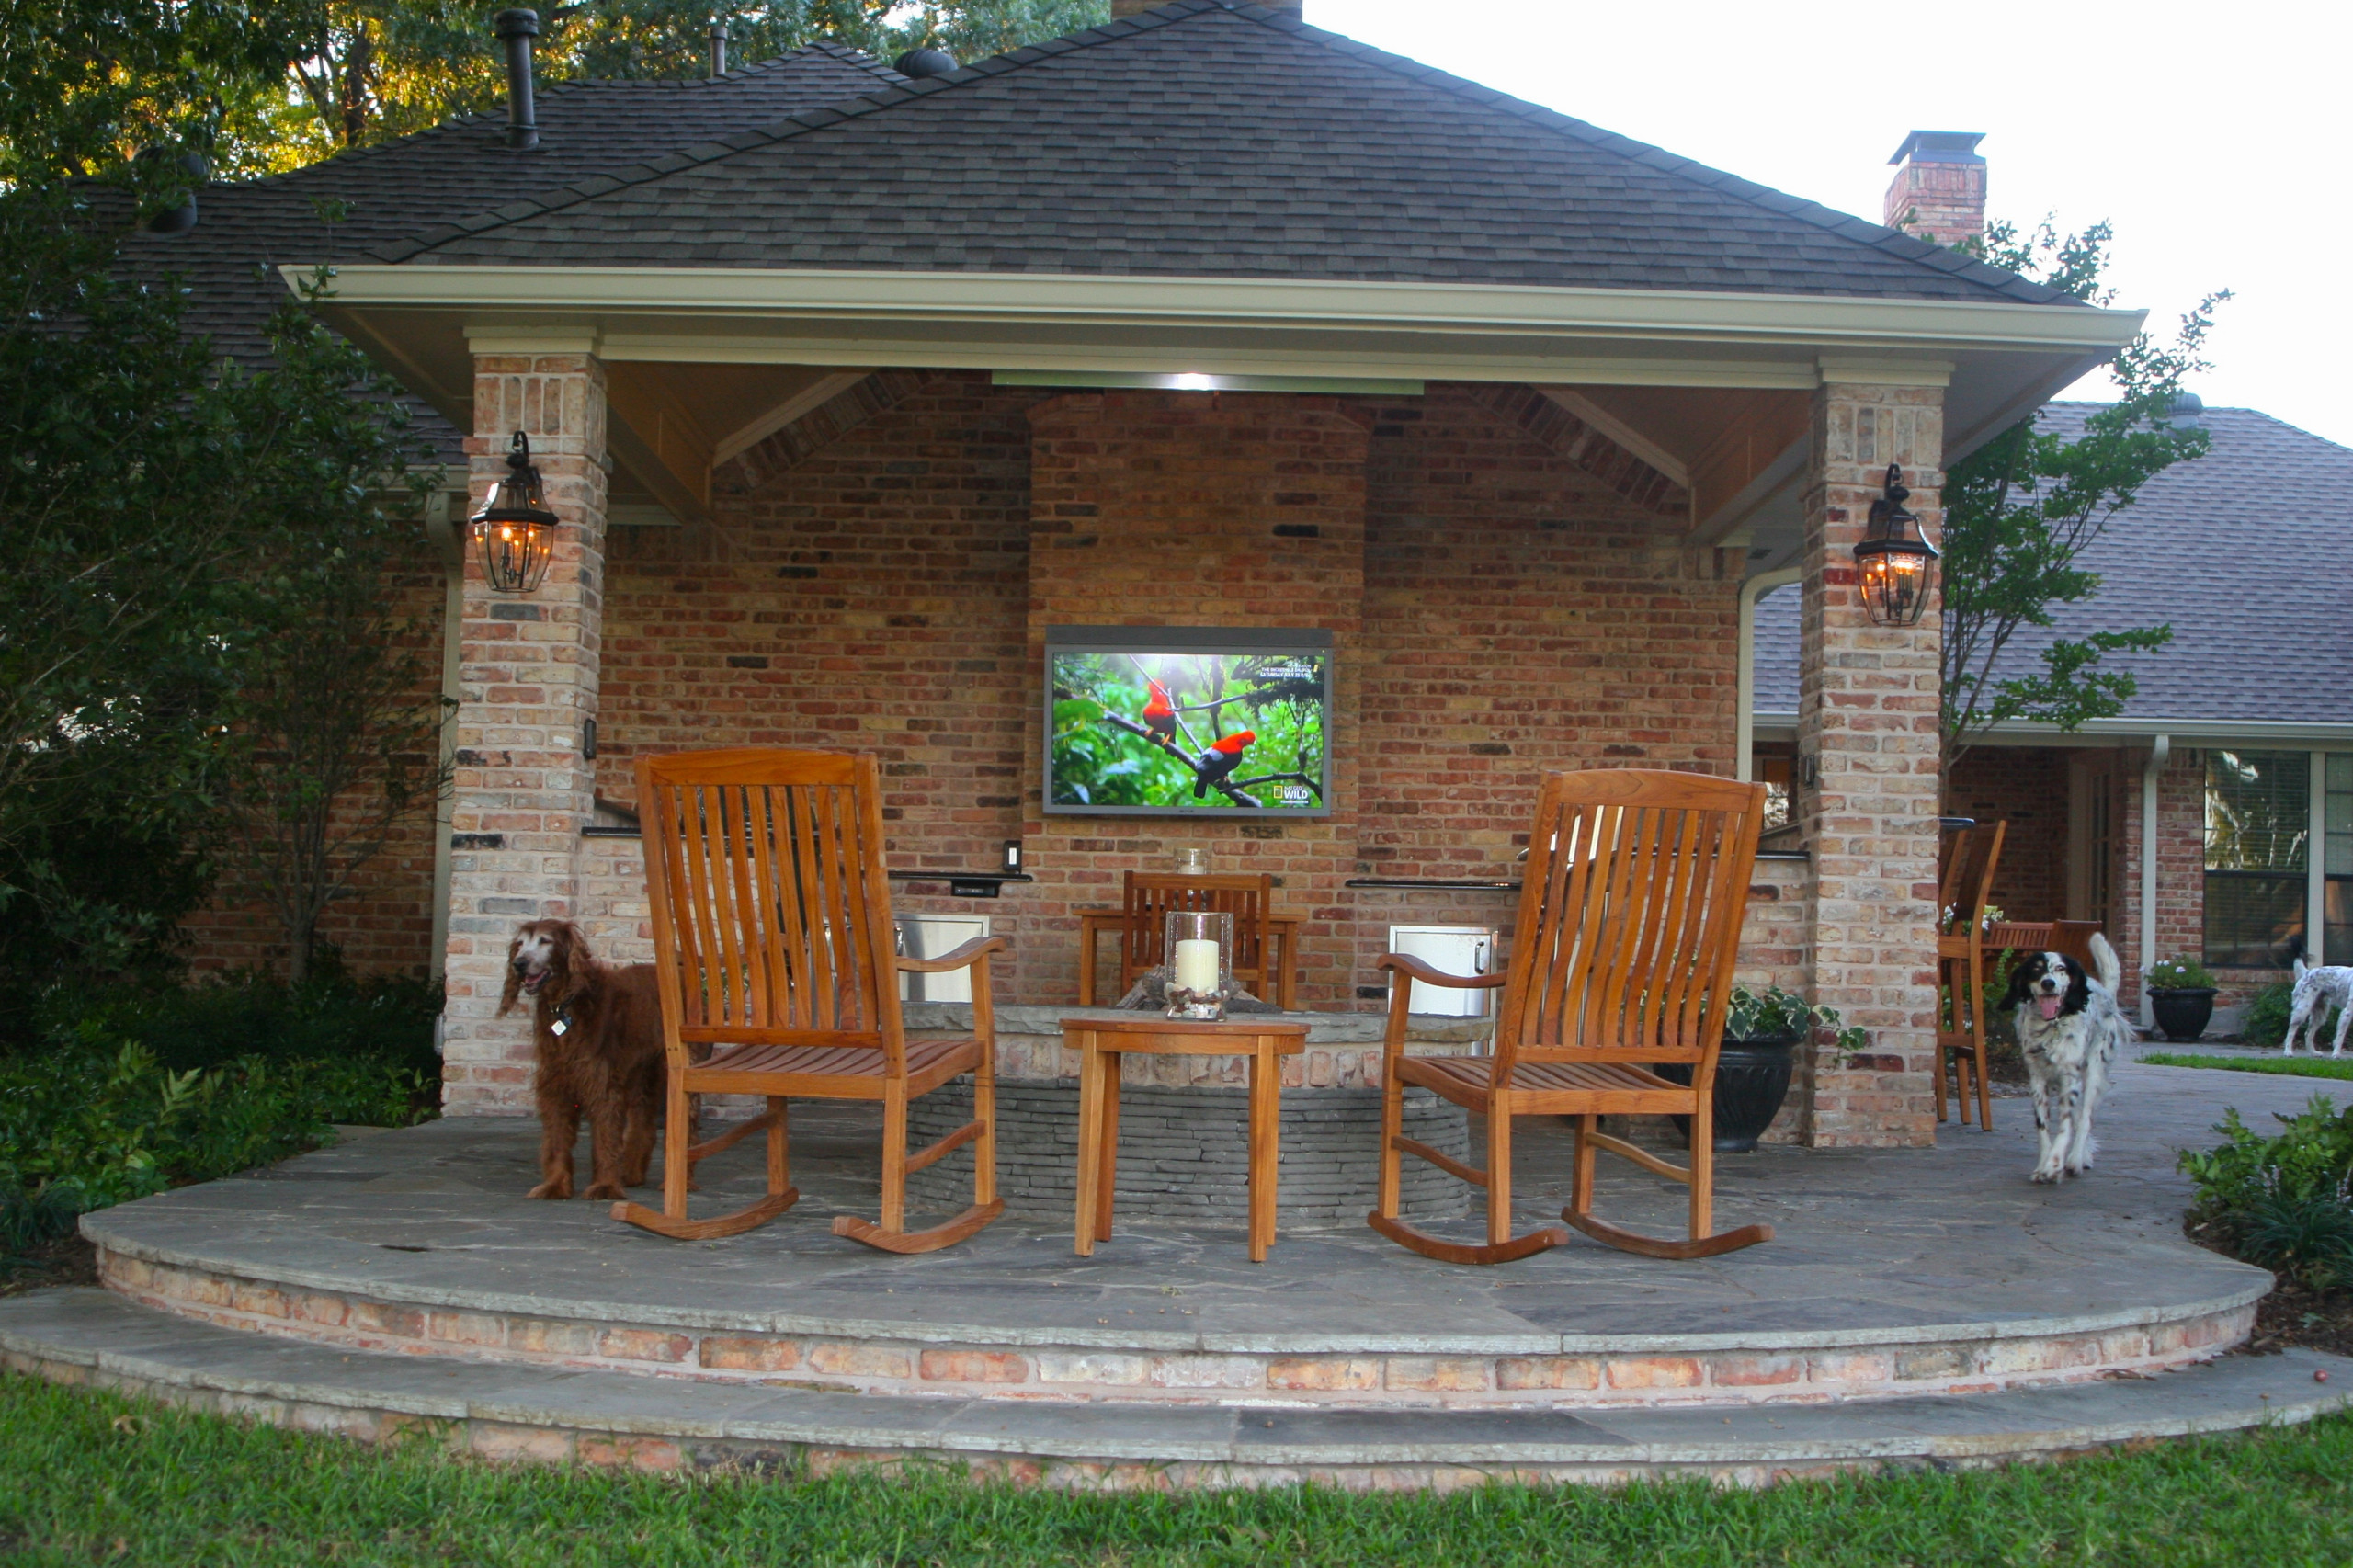 Garden for Her / Outdoor Man Cave for Him